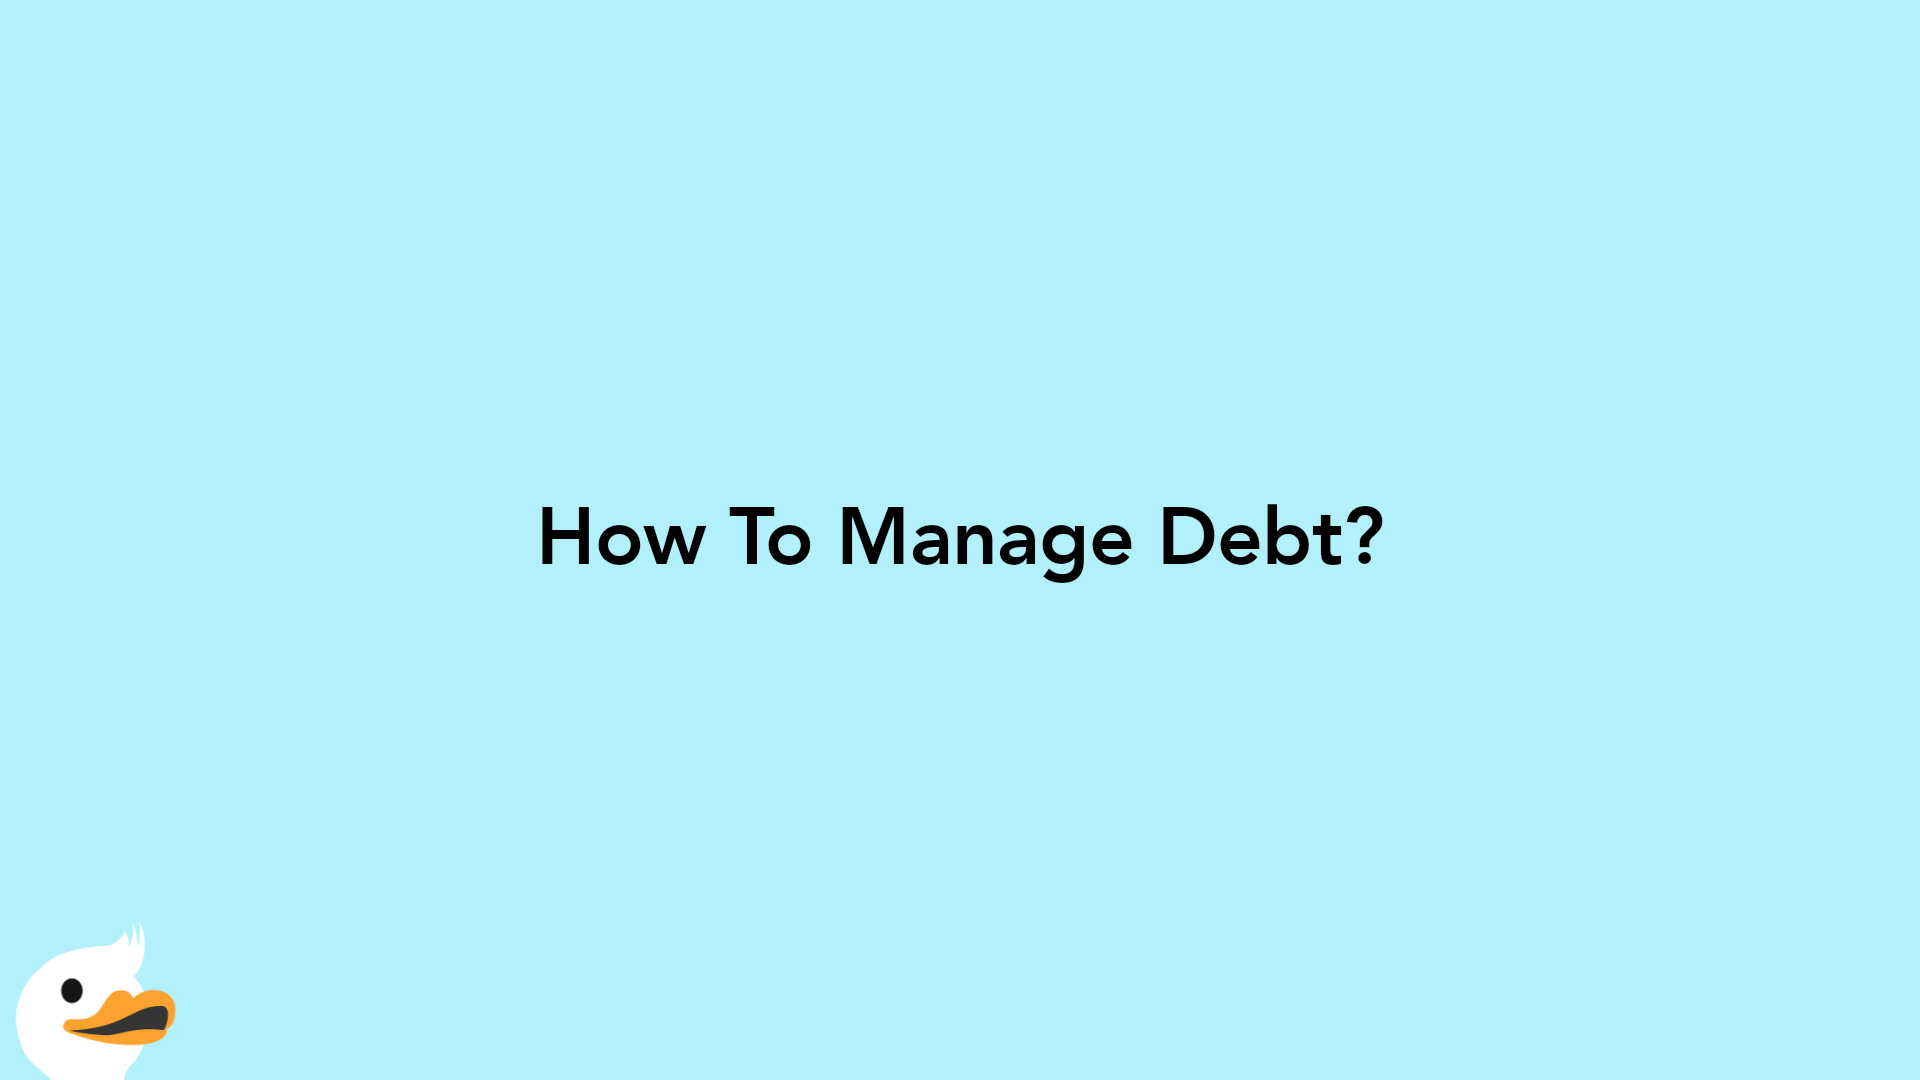 How To Manage Debt?